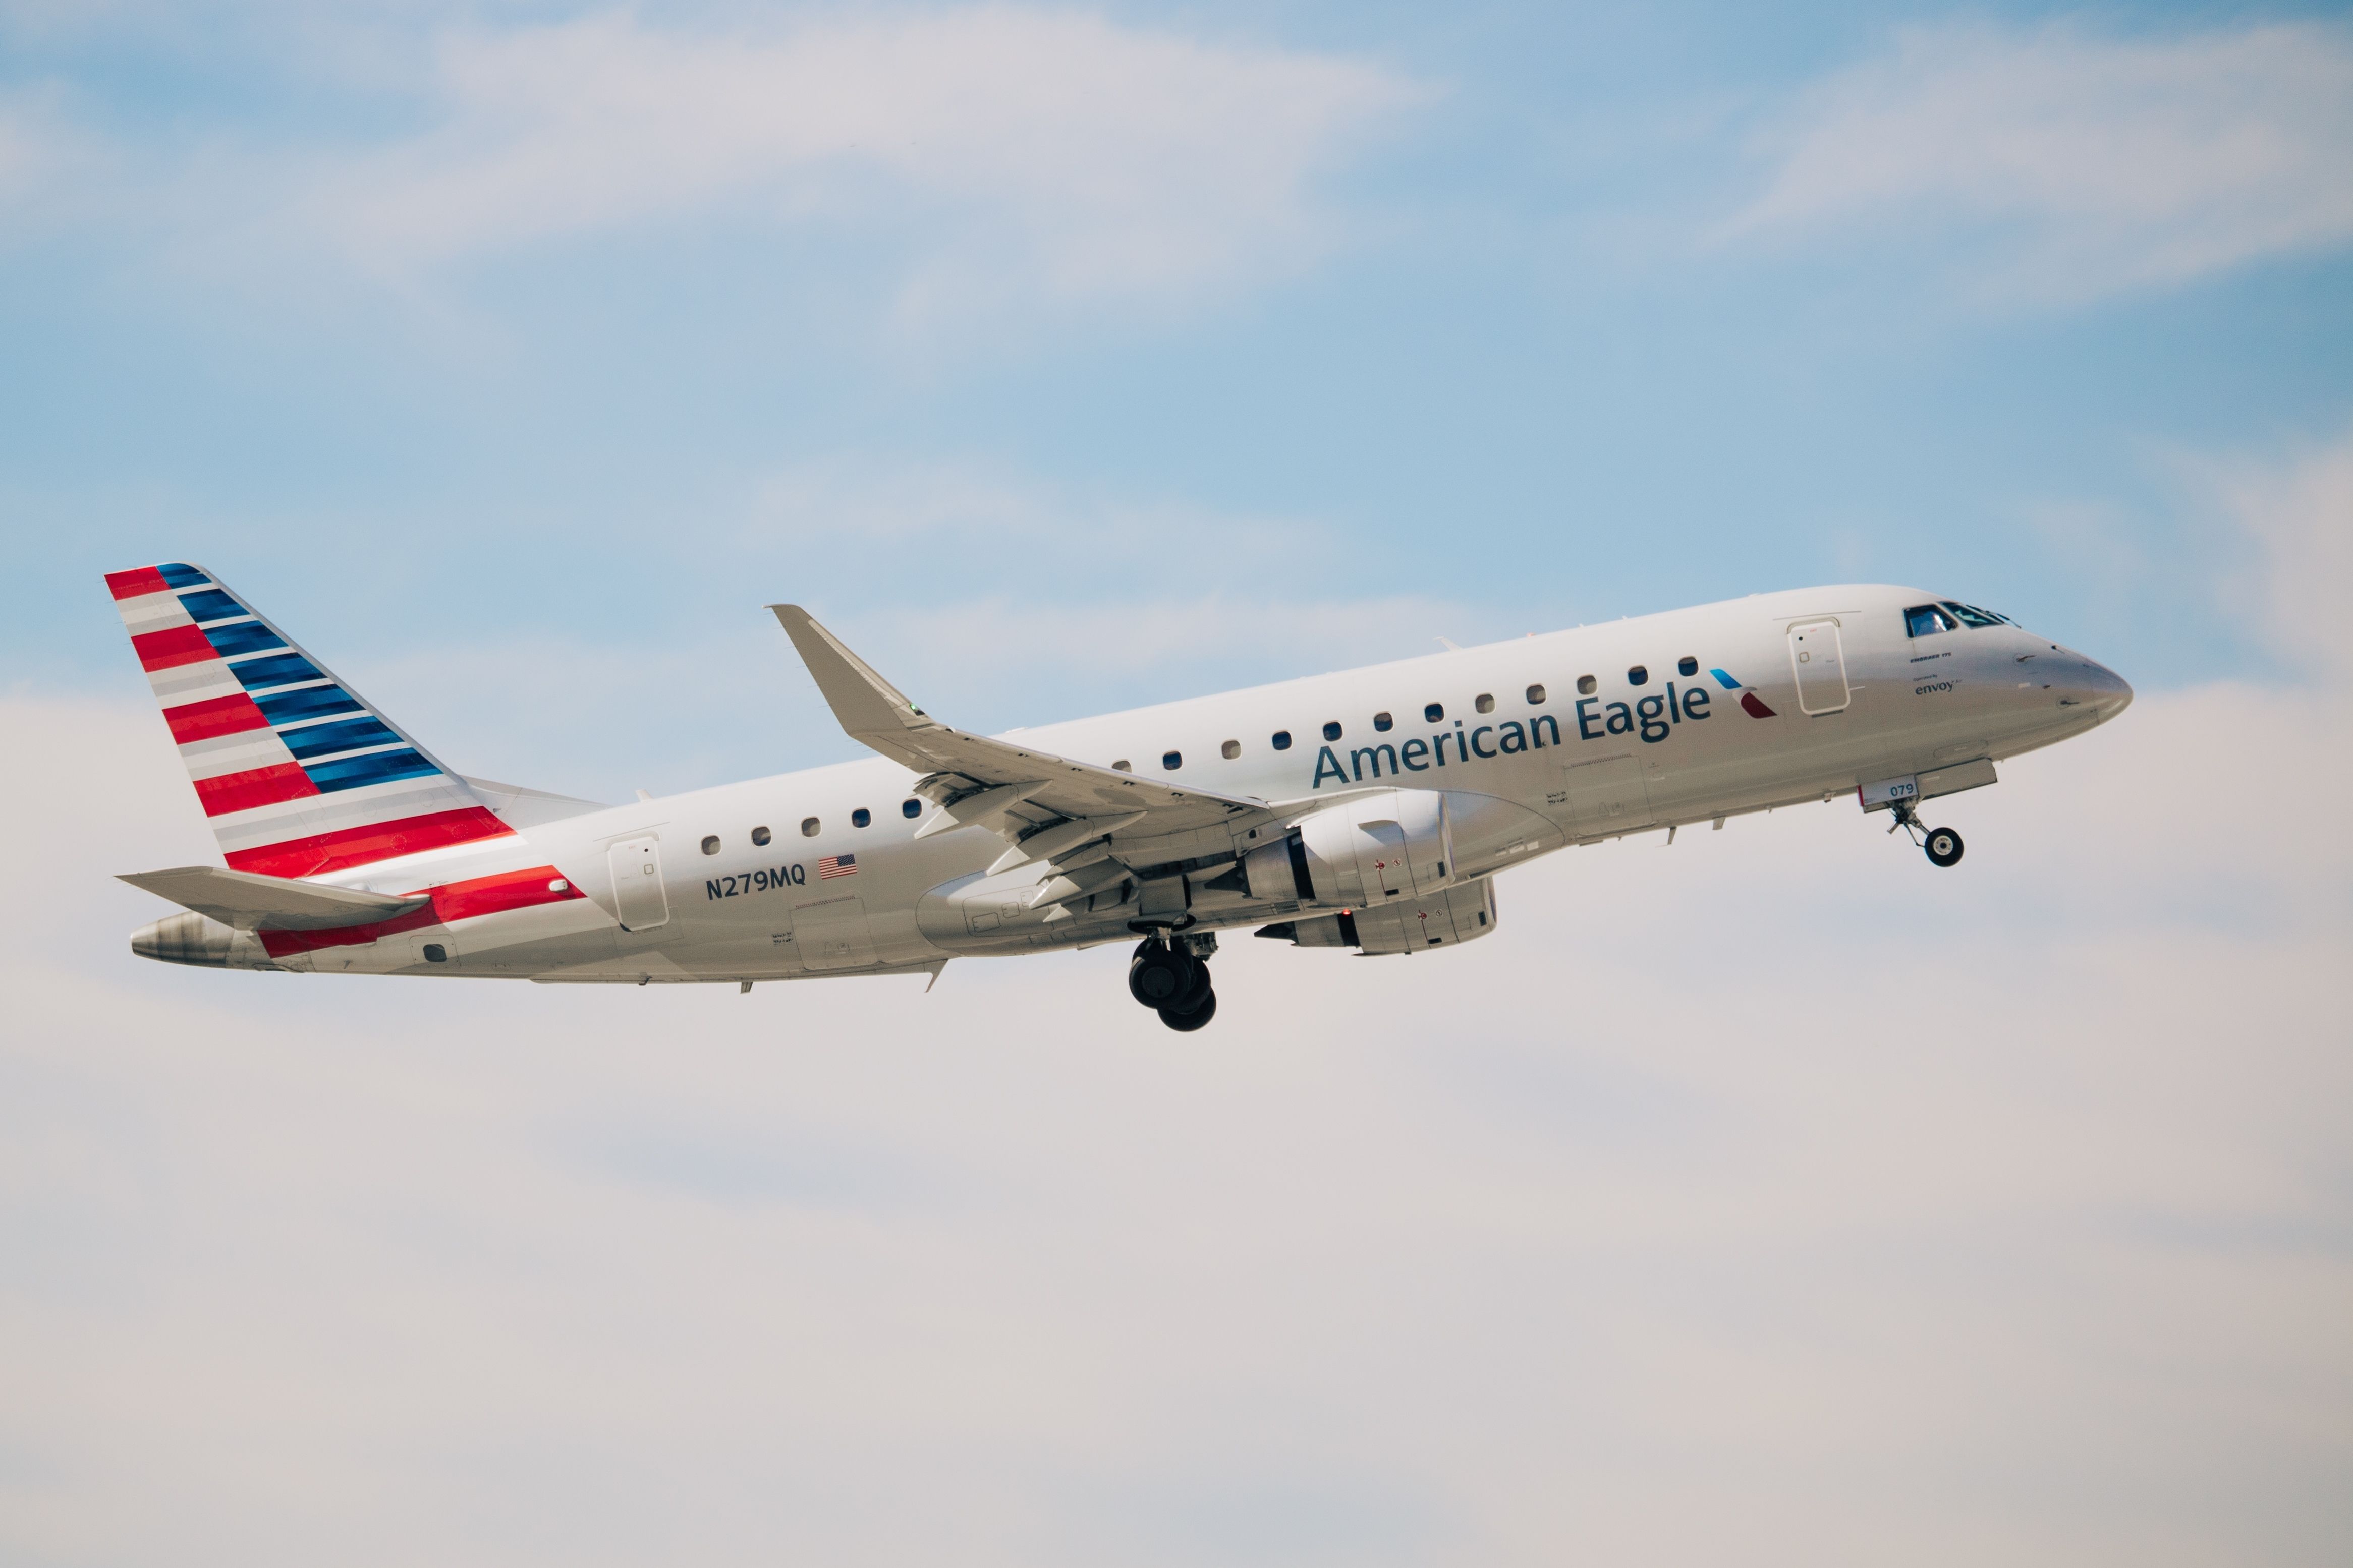 An American Eagle Embraer E170 flying in the sky.